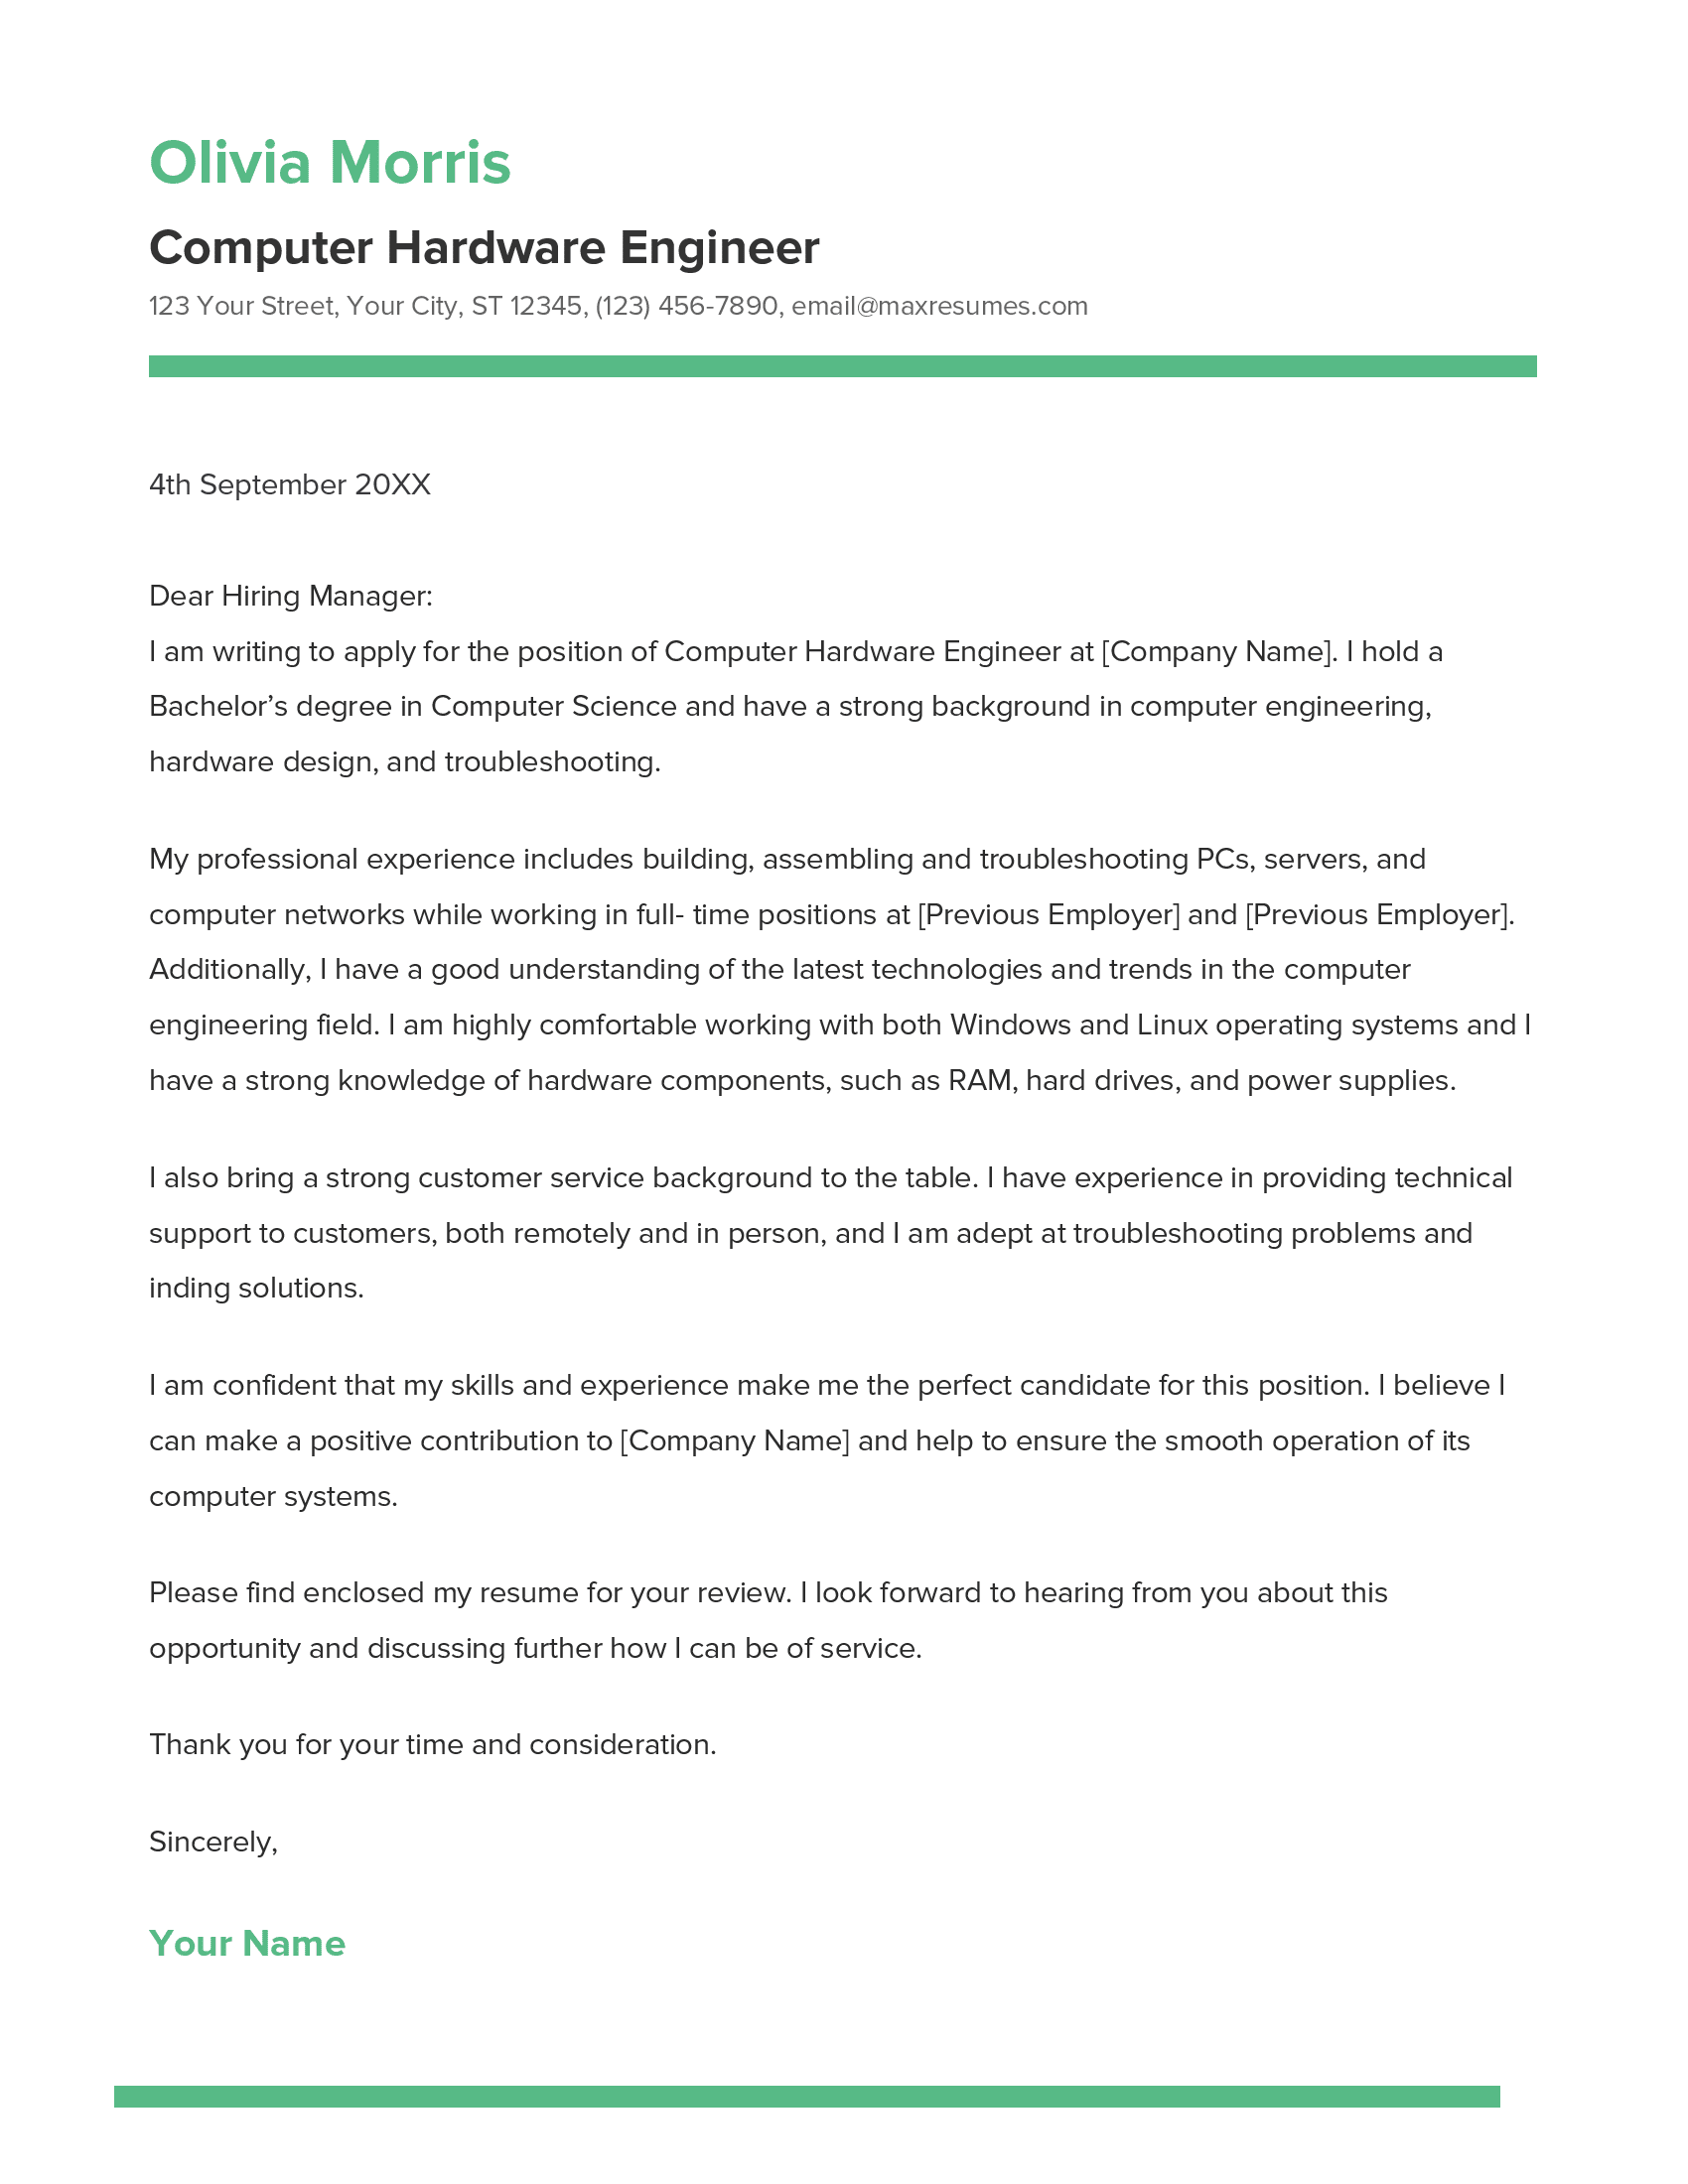 Computer Hardware Engineer Cover Letter Example